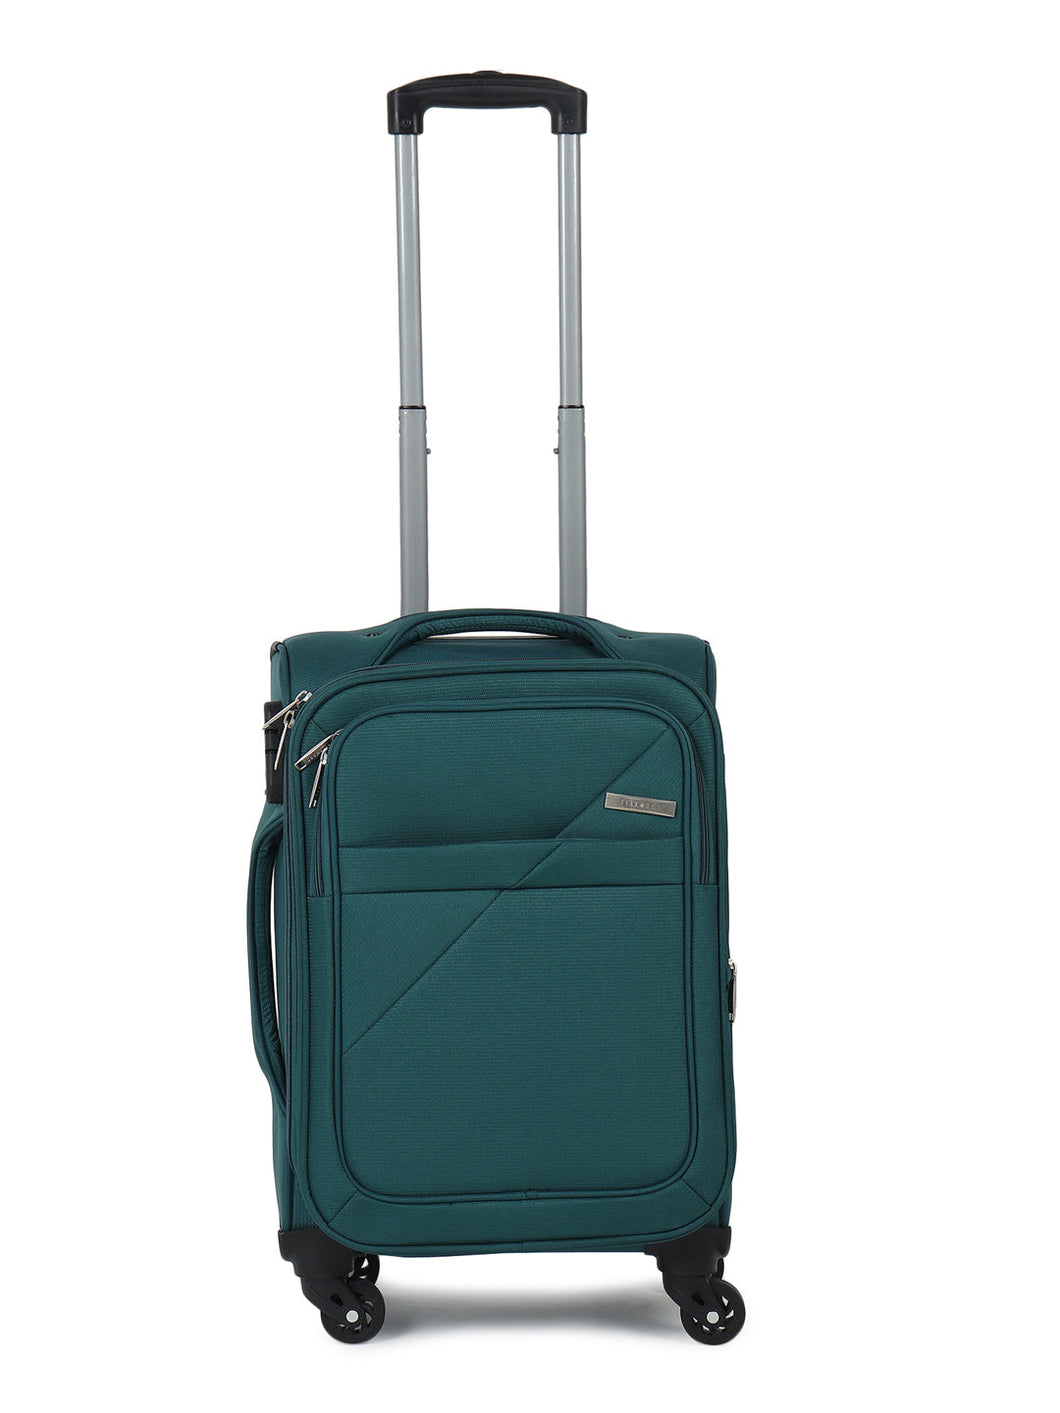 Teal Textured Soft-Sided Trolley Suitcase Medium